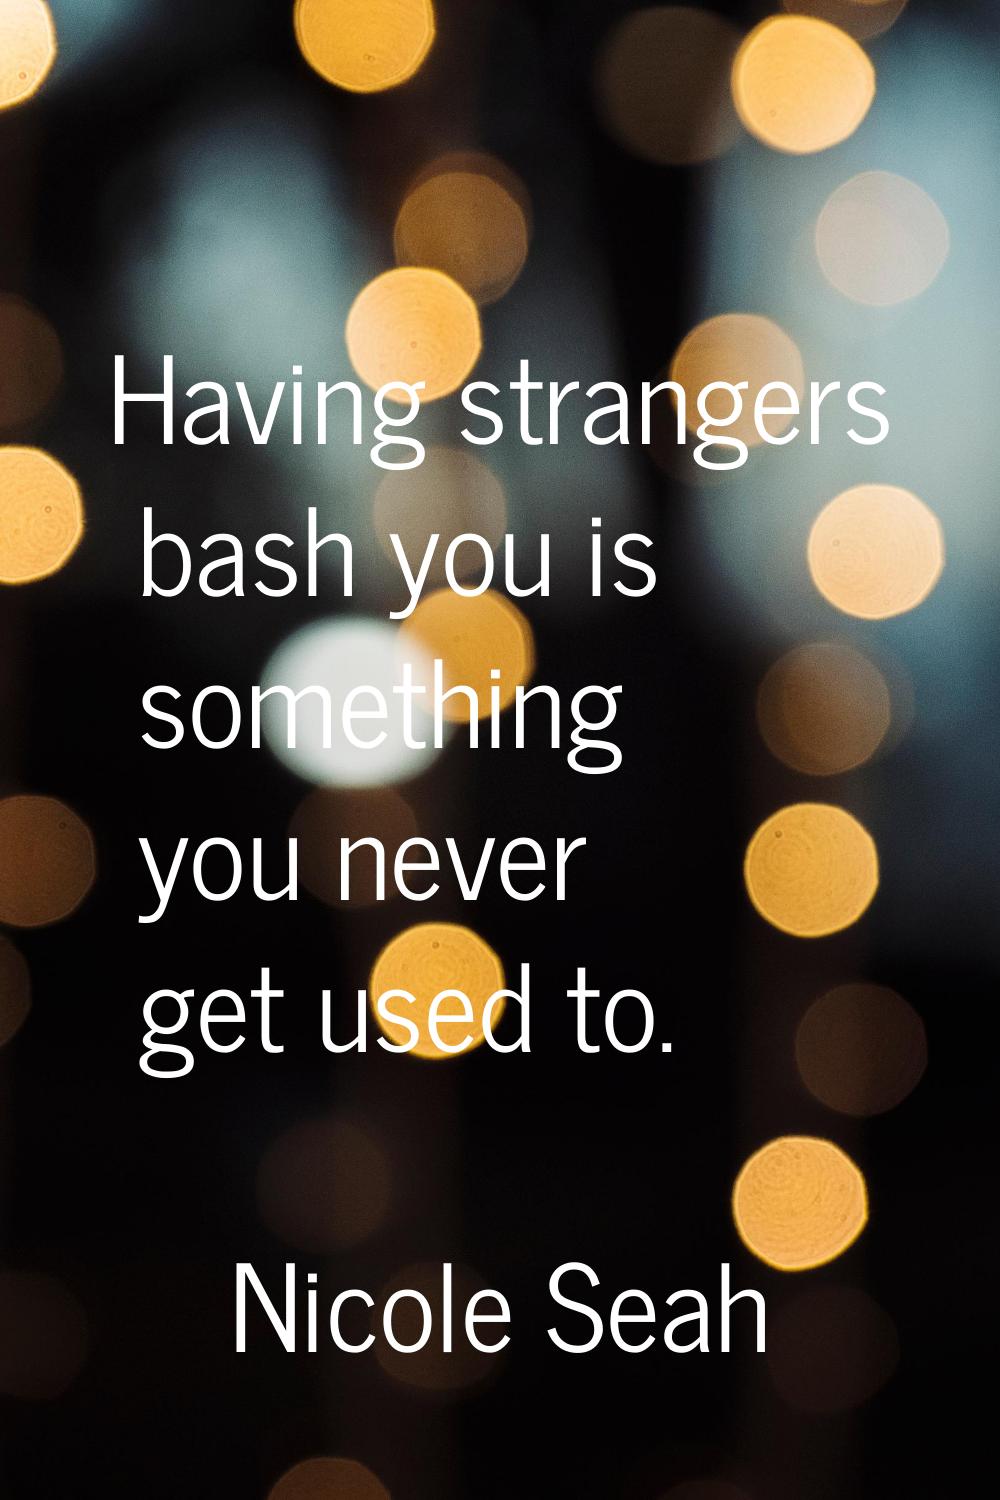 Having strangers bash you is something you never get used to.